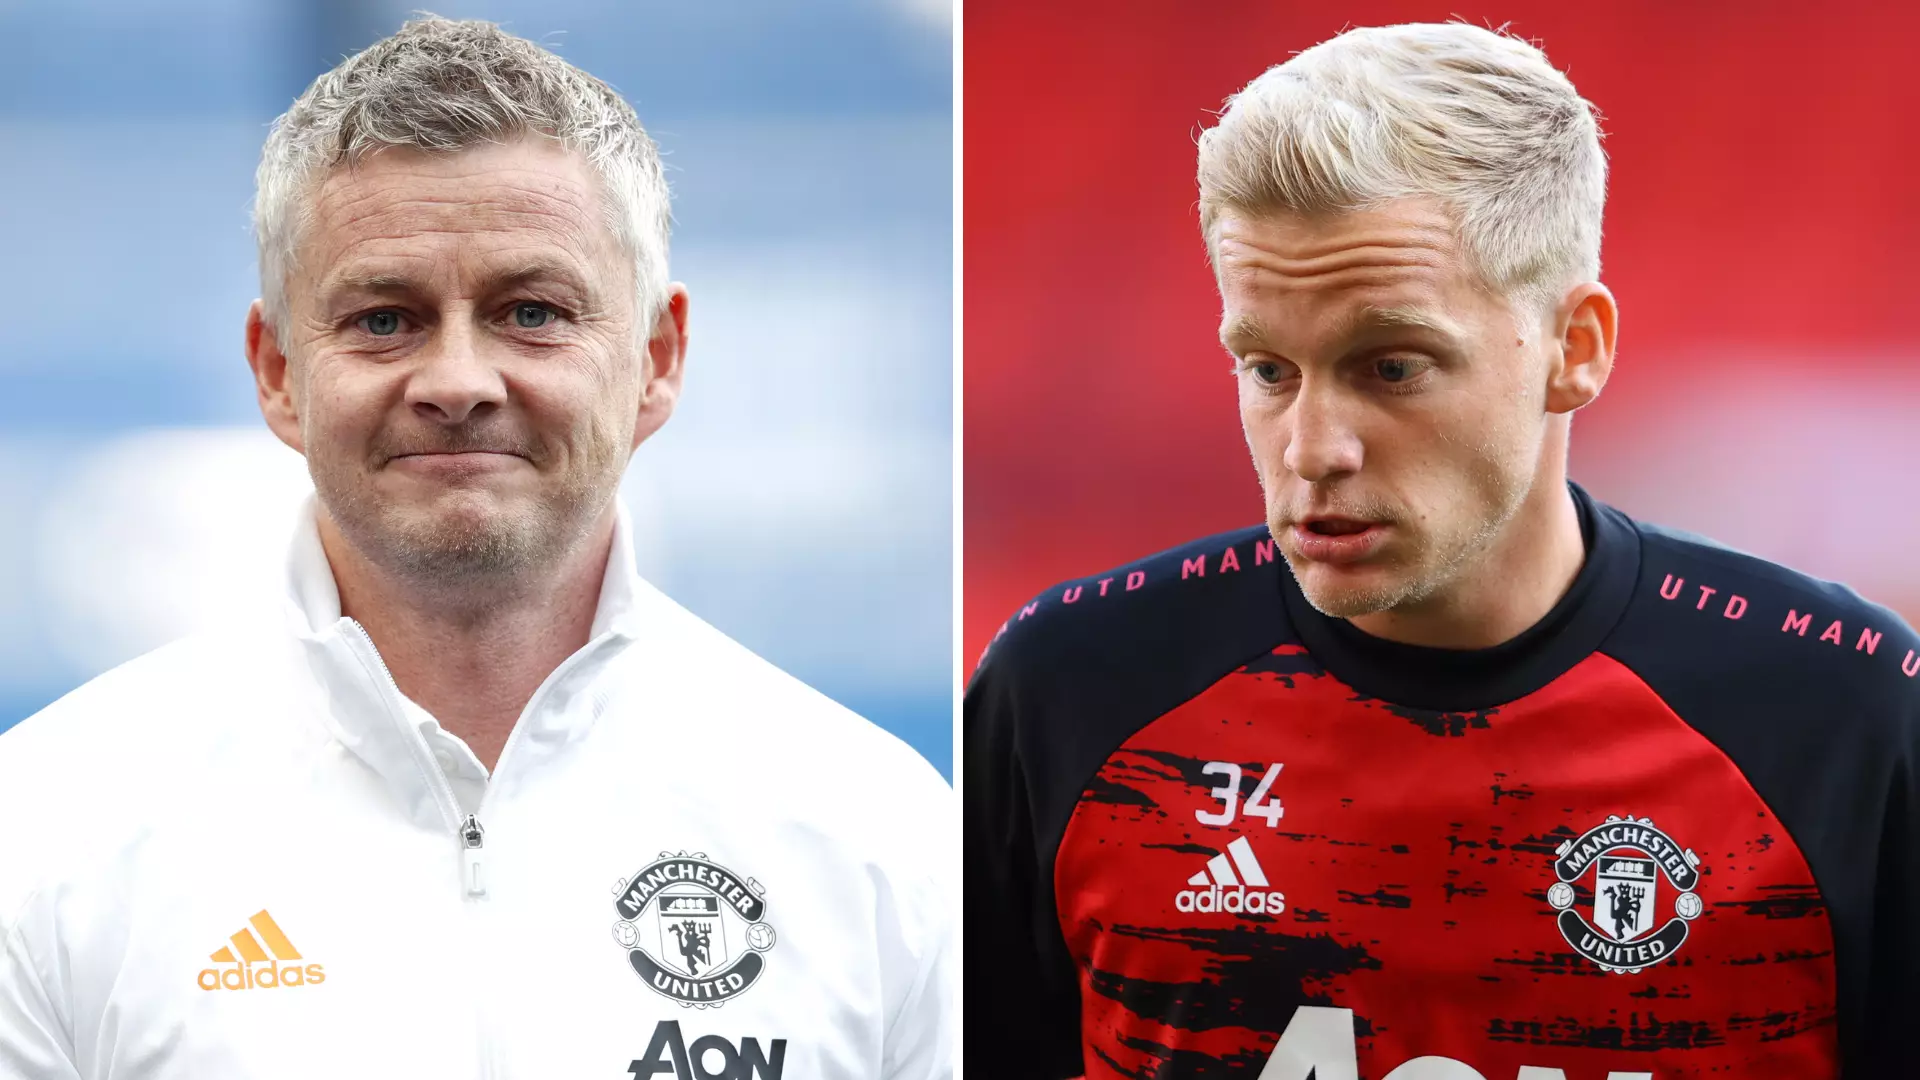 Donny Van De Beek 'Doesn't Want To Give Interviews' Anymore And Is 'Upset' At Manchester United